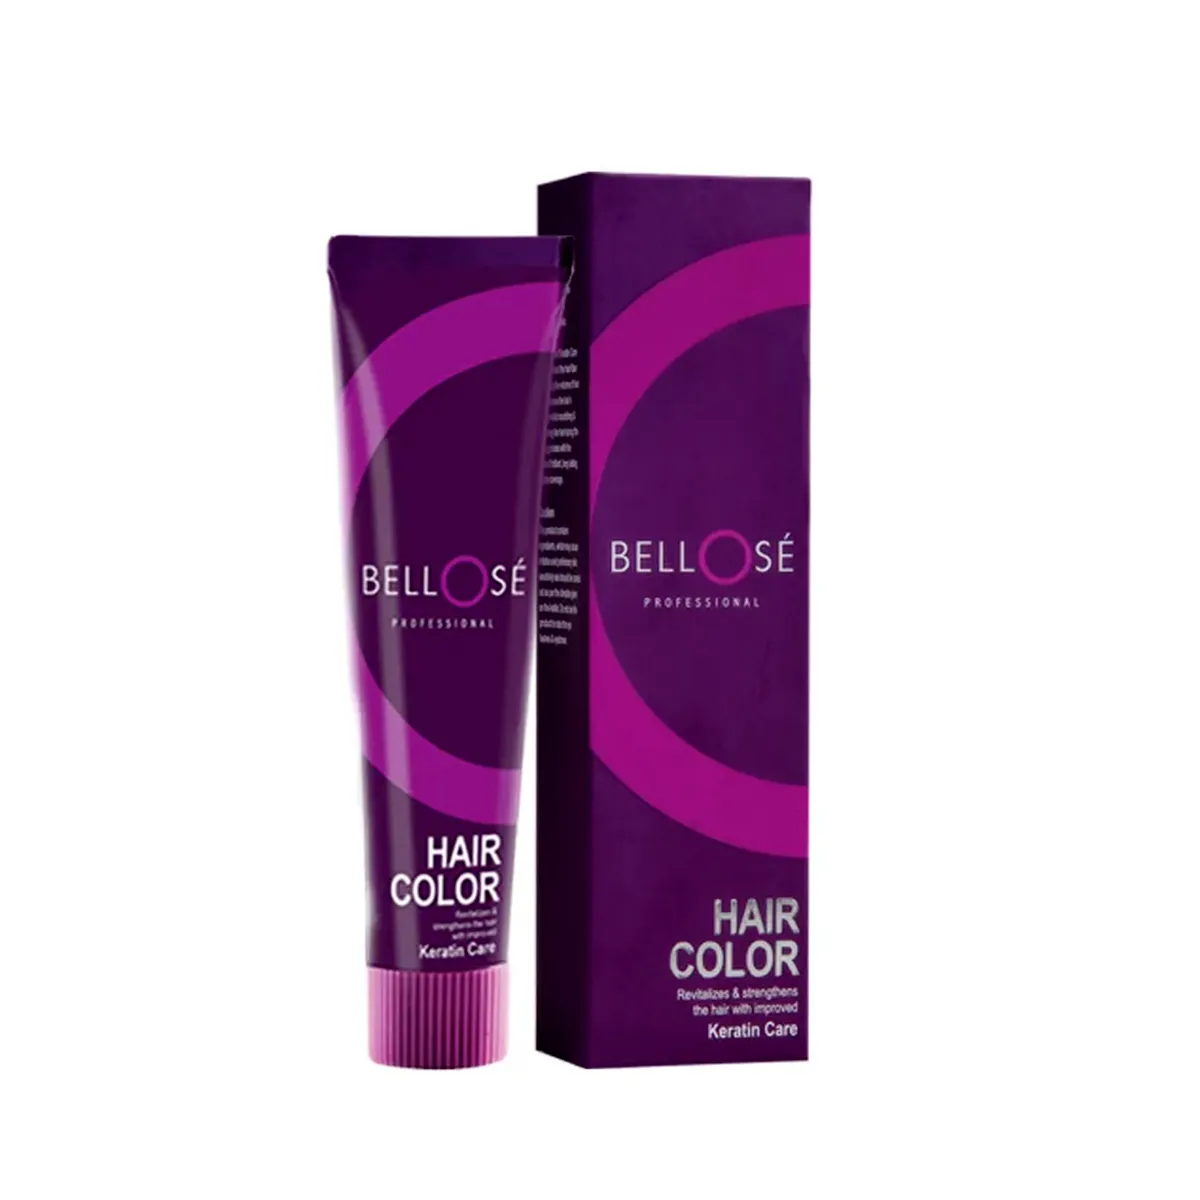 First product image of Bellose Hair Color 2.0 60ml